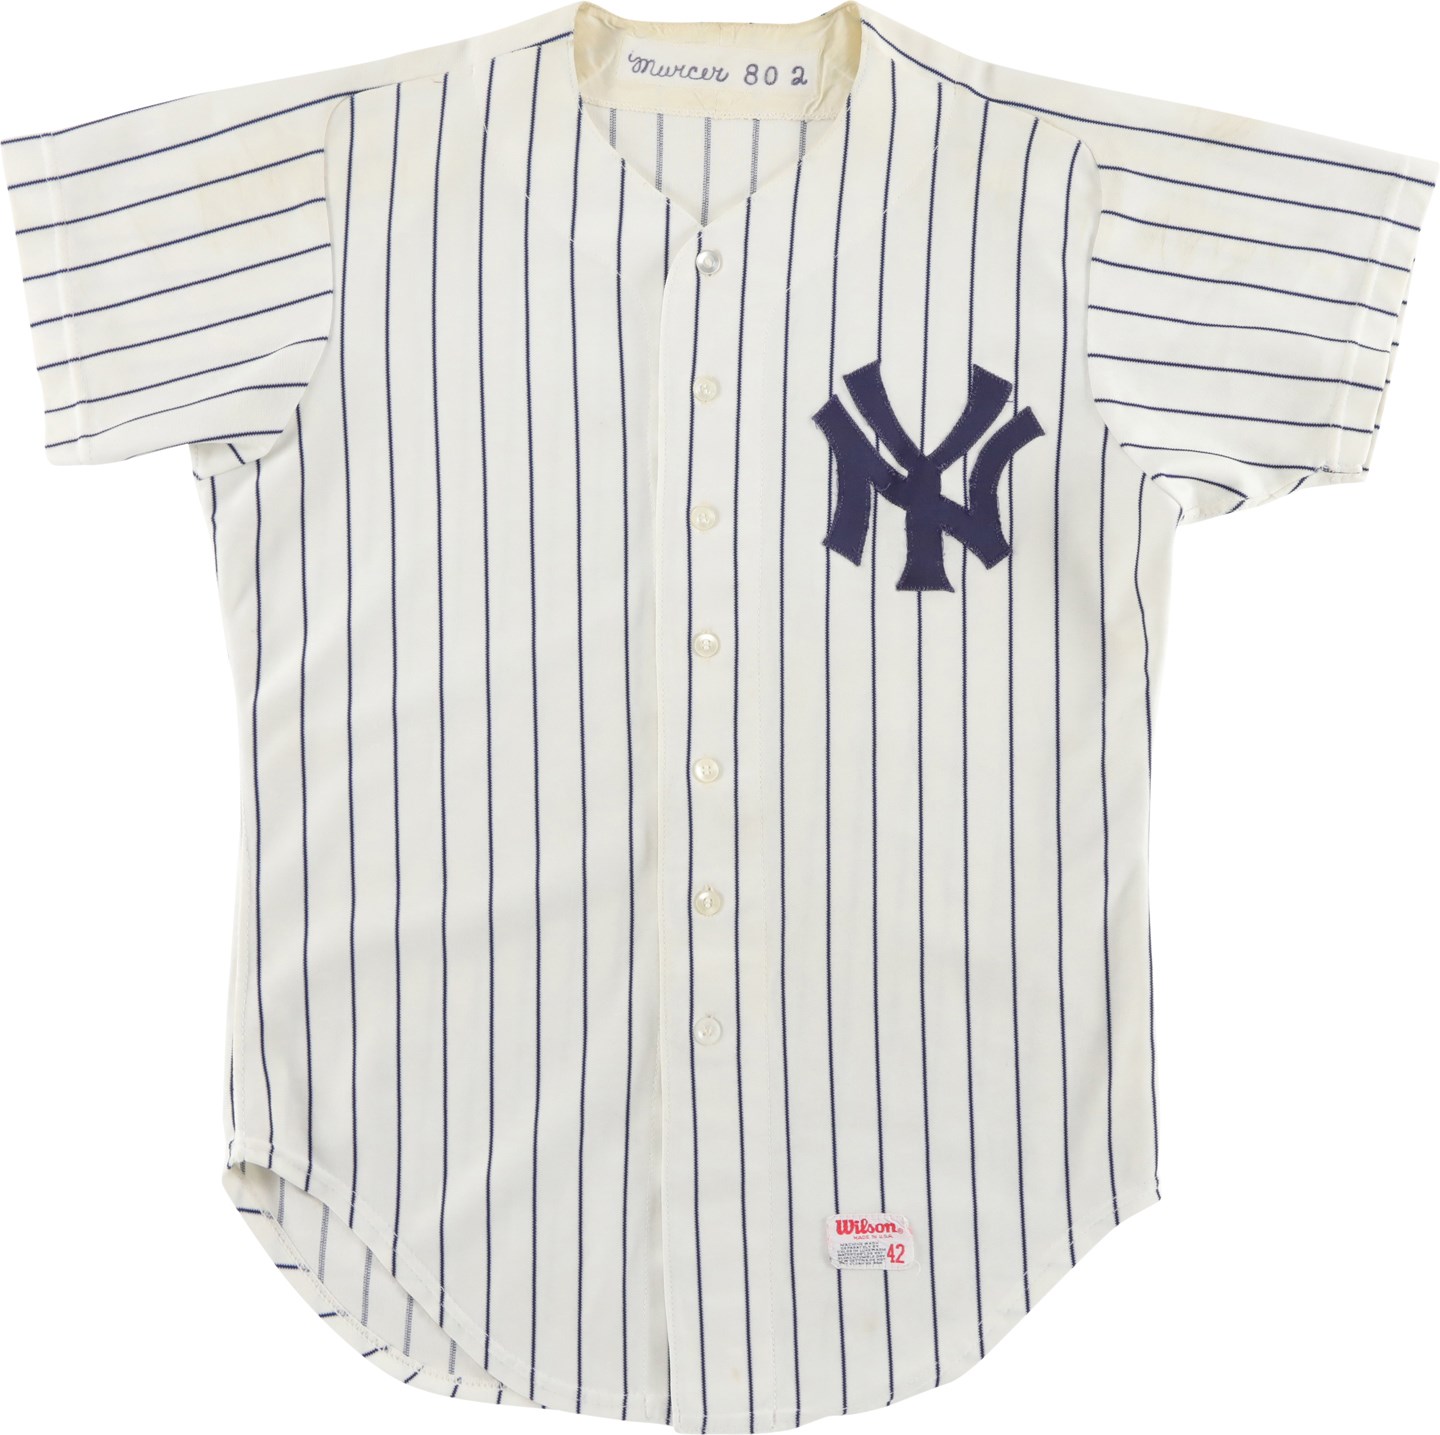 - 1980 Bobby Murcer Photo-Matched New York Yankees Game Worn Jersey from Thurman Munson Plaque Dedication Game - Three Additional Matches with Home Run Game (Davious Photo-Matched LOA)